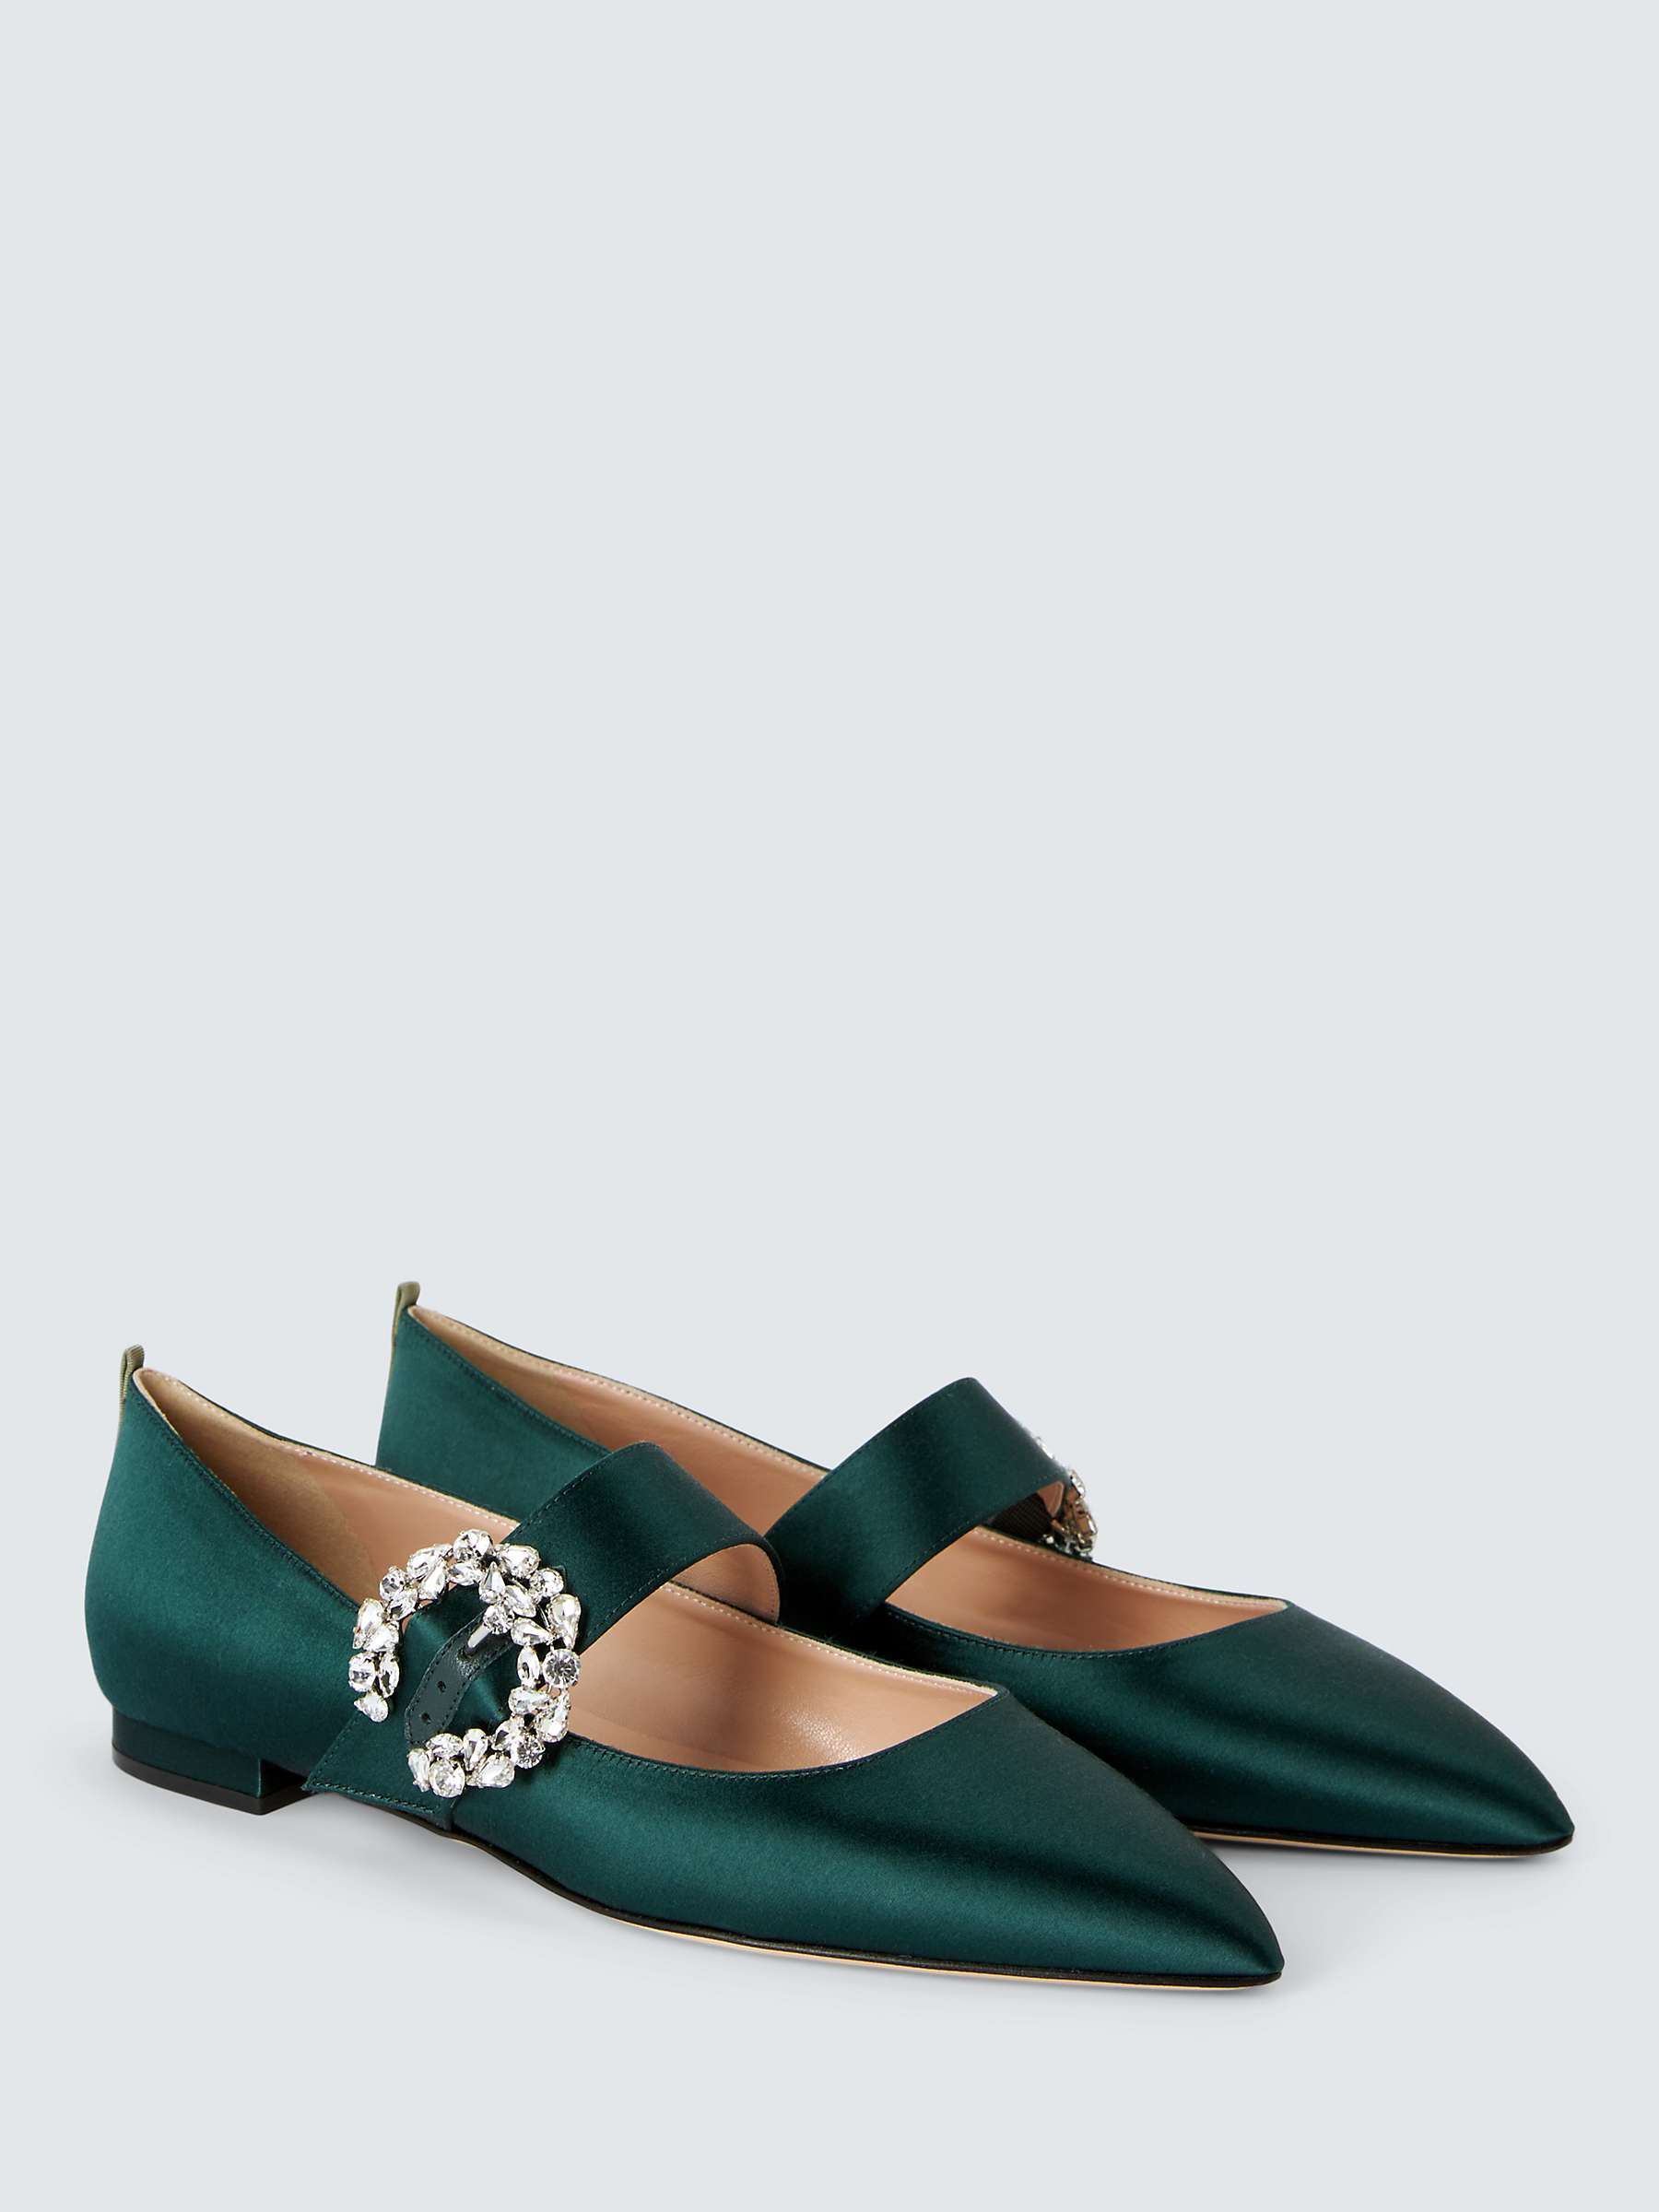 Buy SJP by Sarah Jessica Parker Chime Satin Pointed Mary Jane Flats, Jungle Online at johnlewis.com